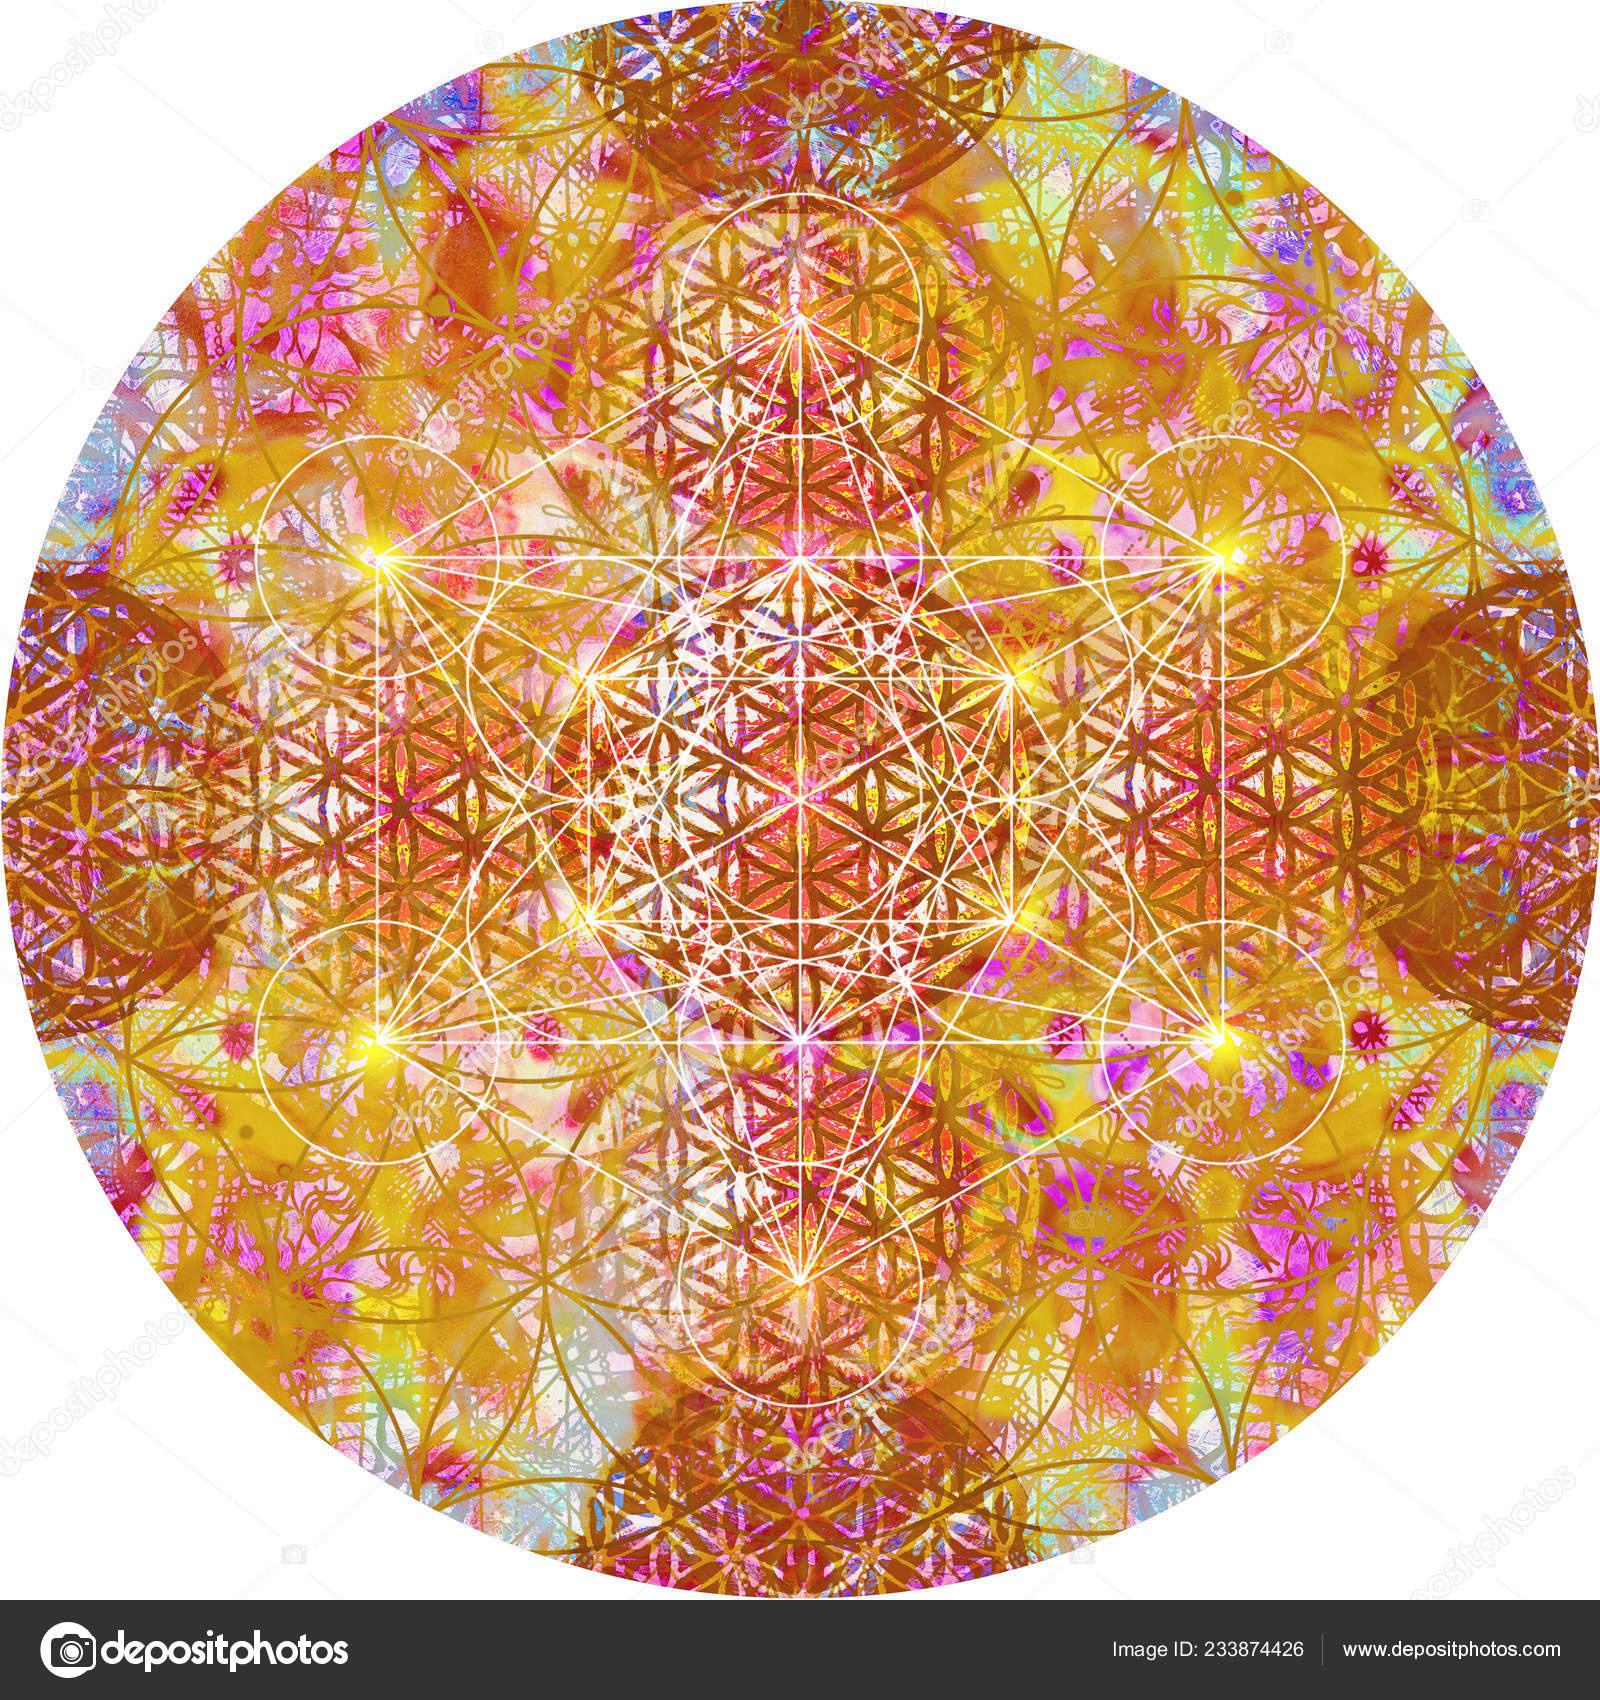 Abstract Mandala Flower Life Metatron Cube Royalty Free Photo Stock Image By C Zoomarket 233874426